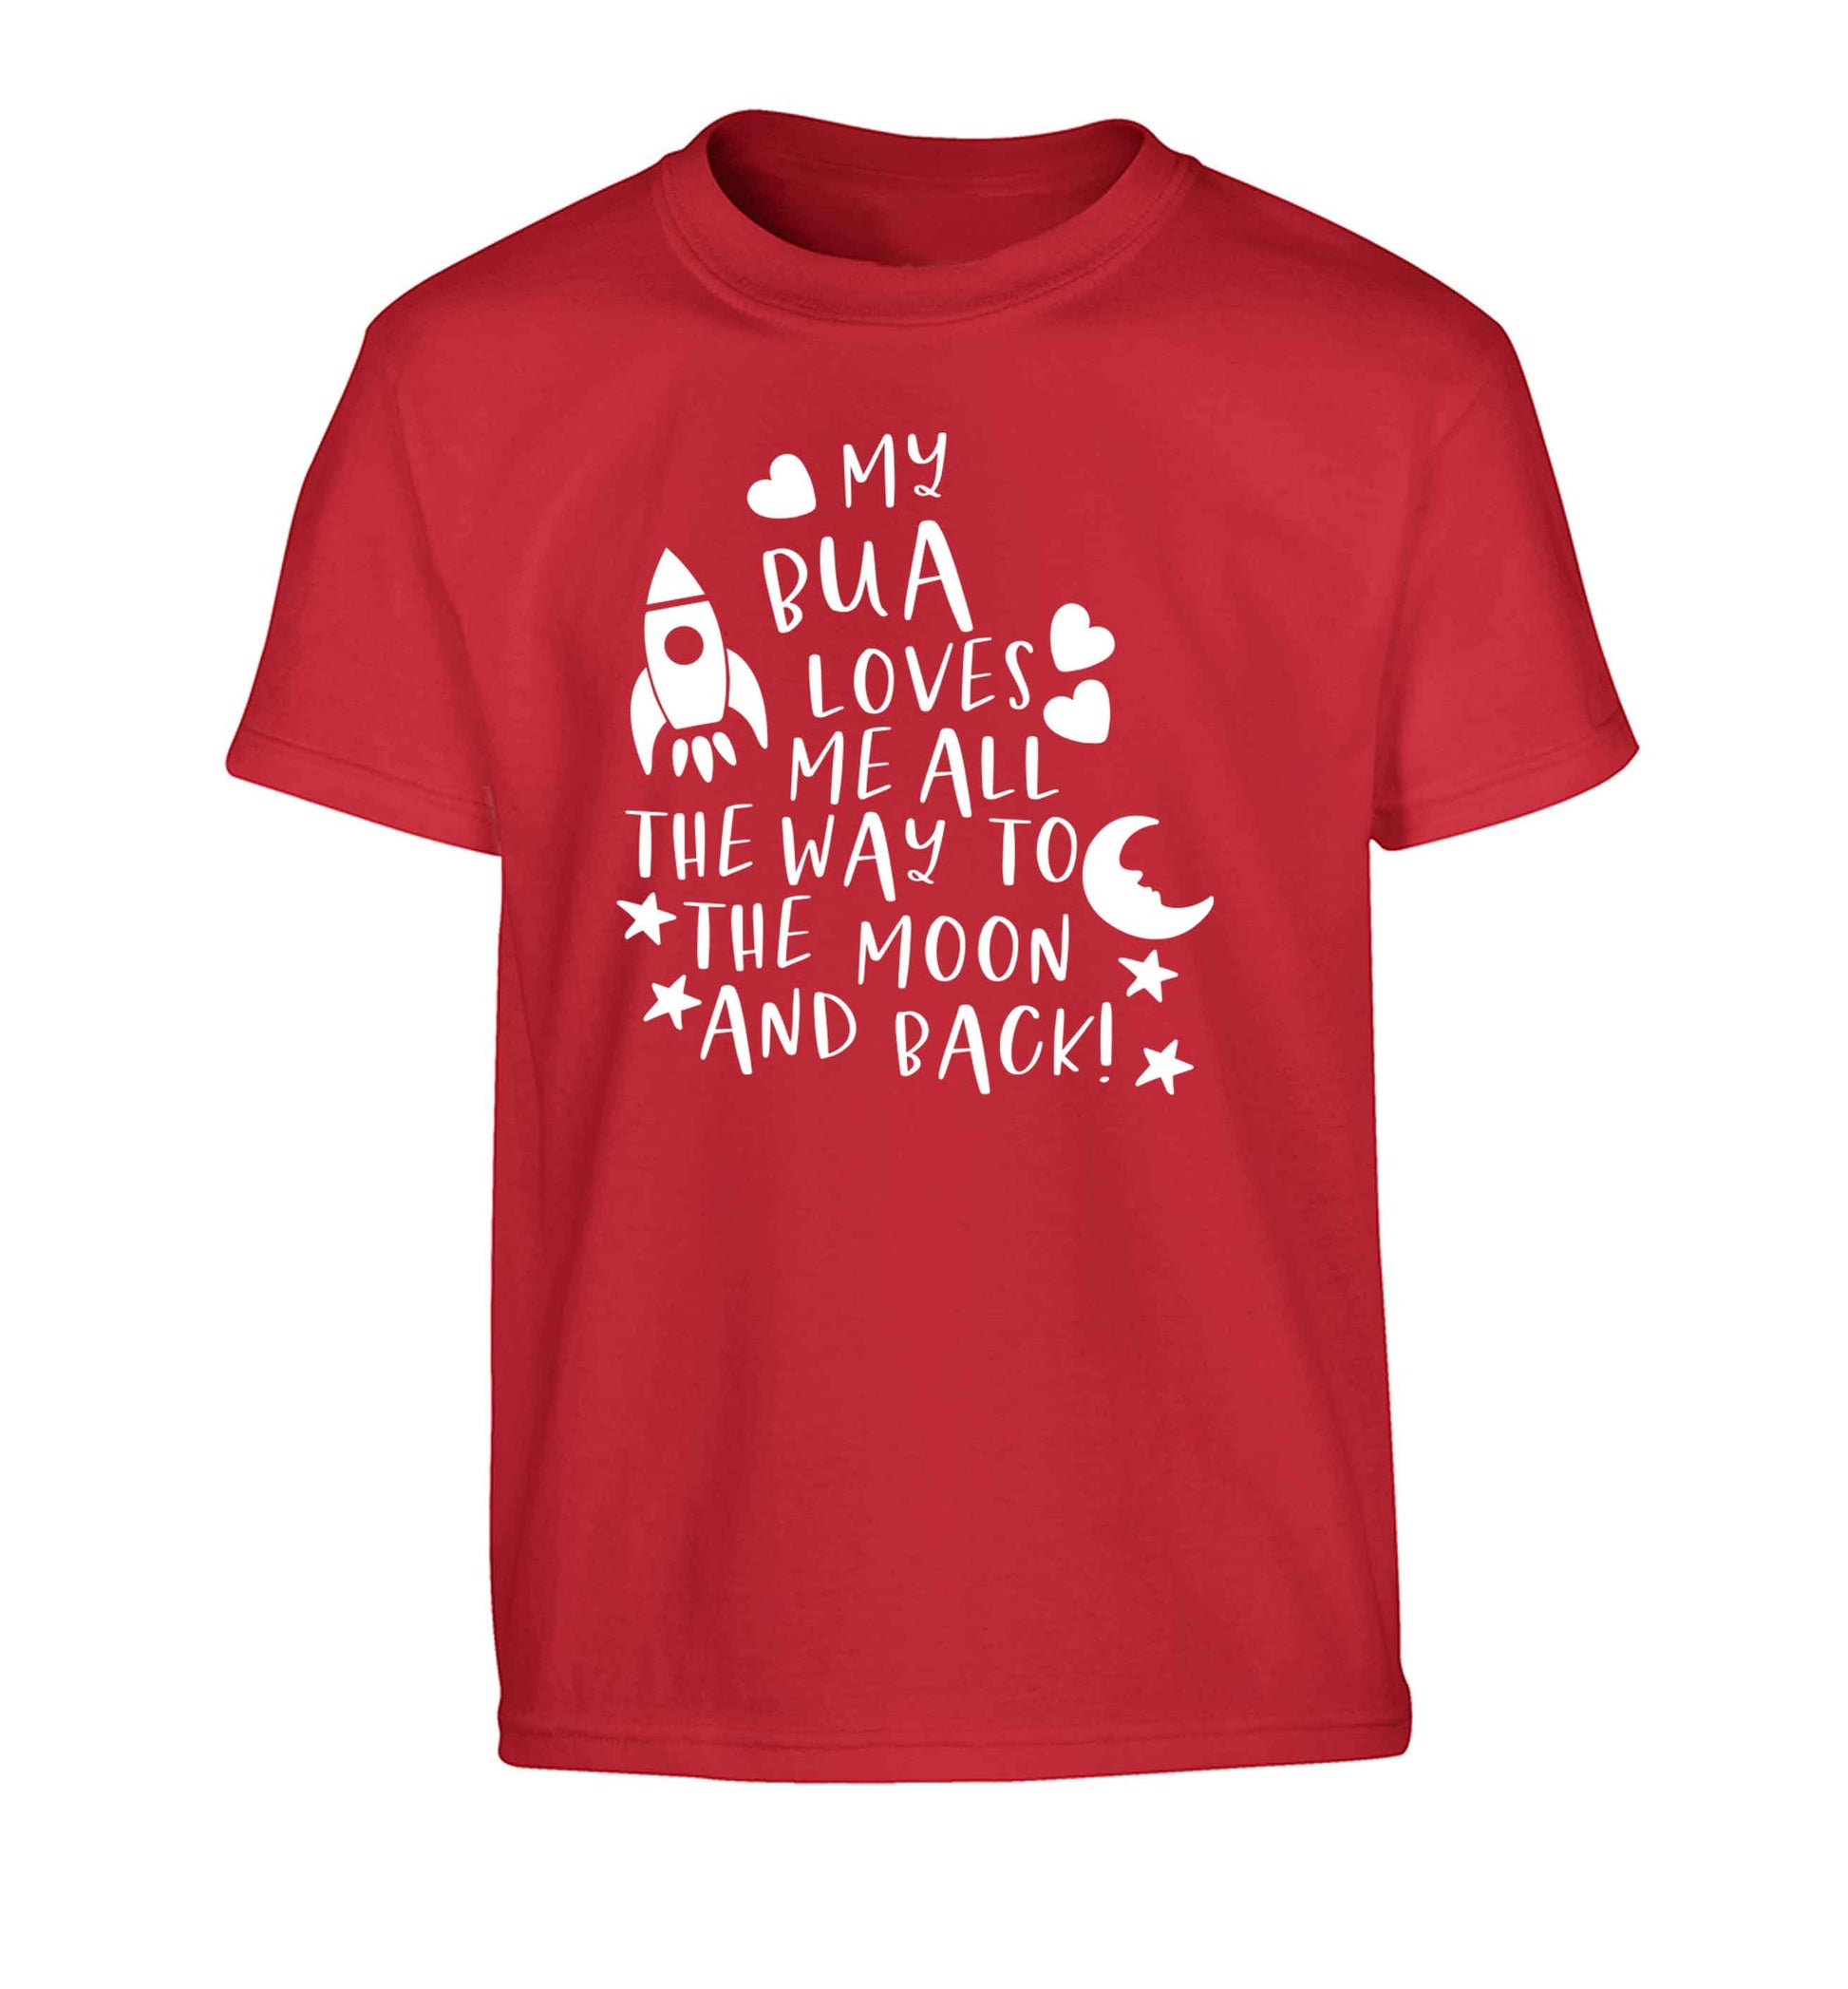 My bua loves me all they way to the moon and back Children's red Tshirt 12-13 Years